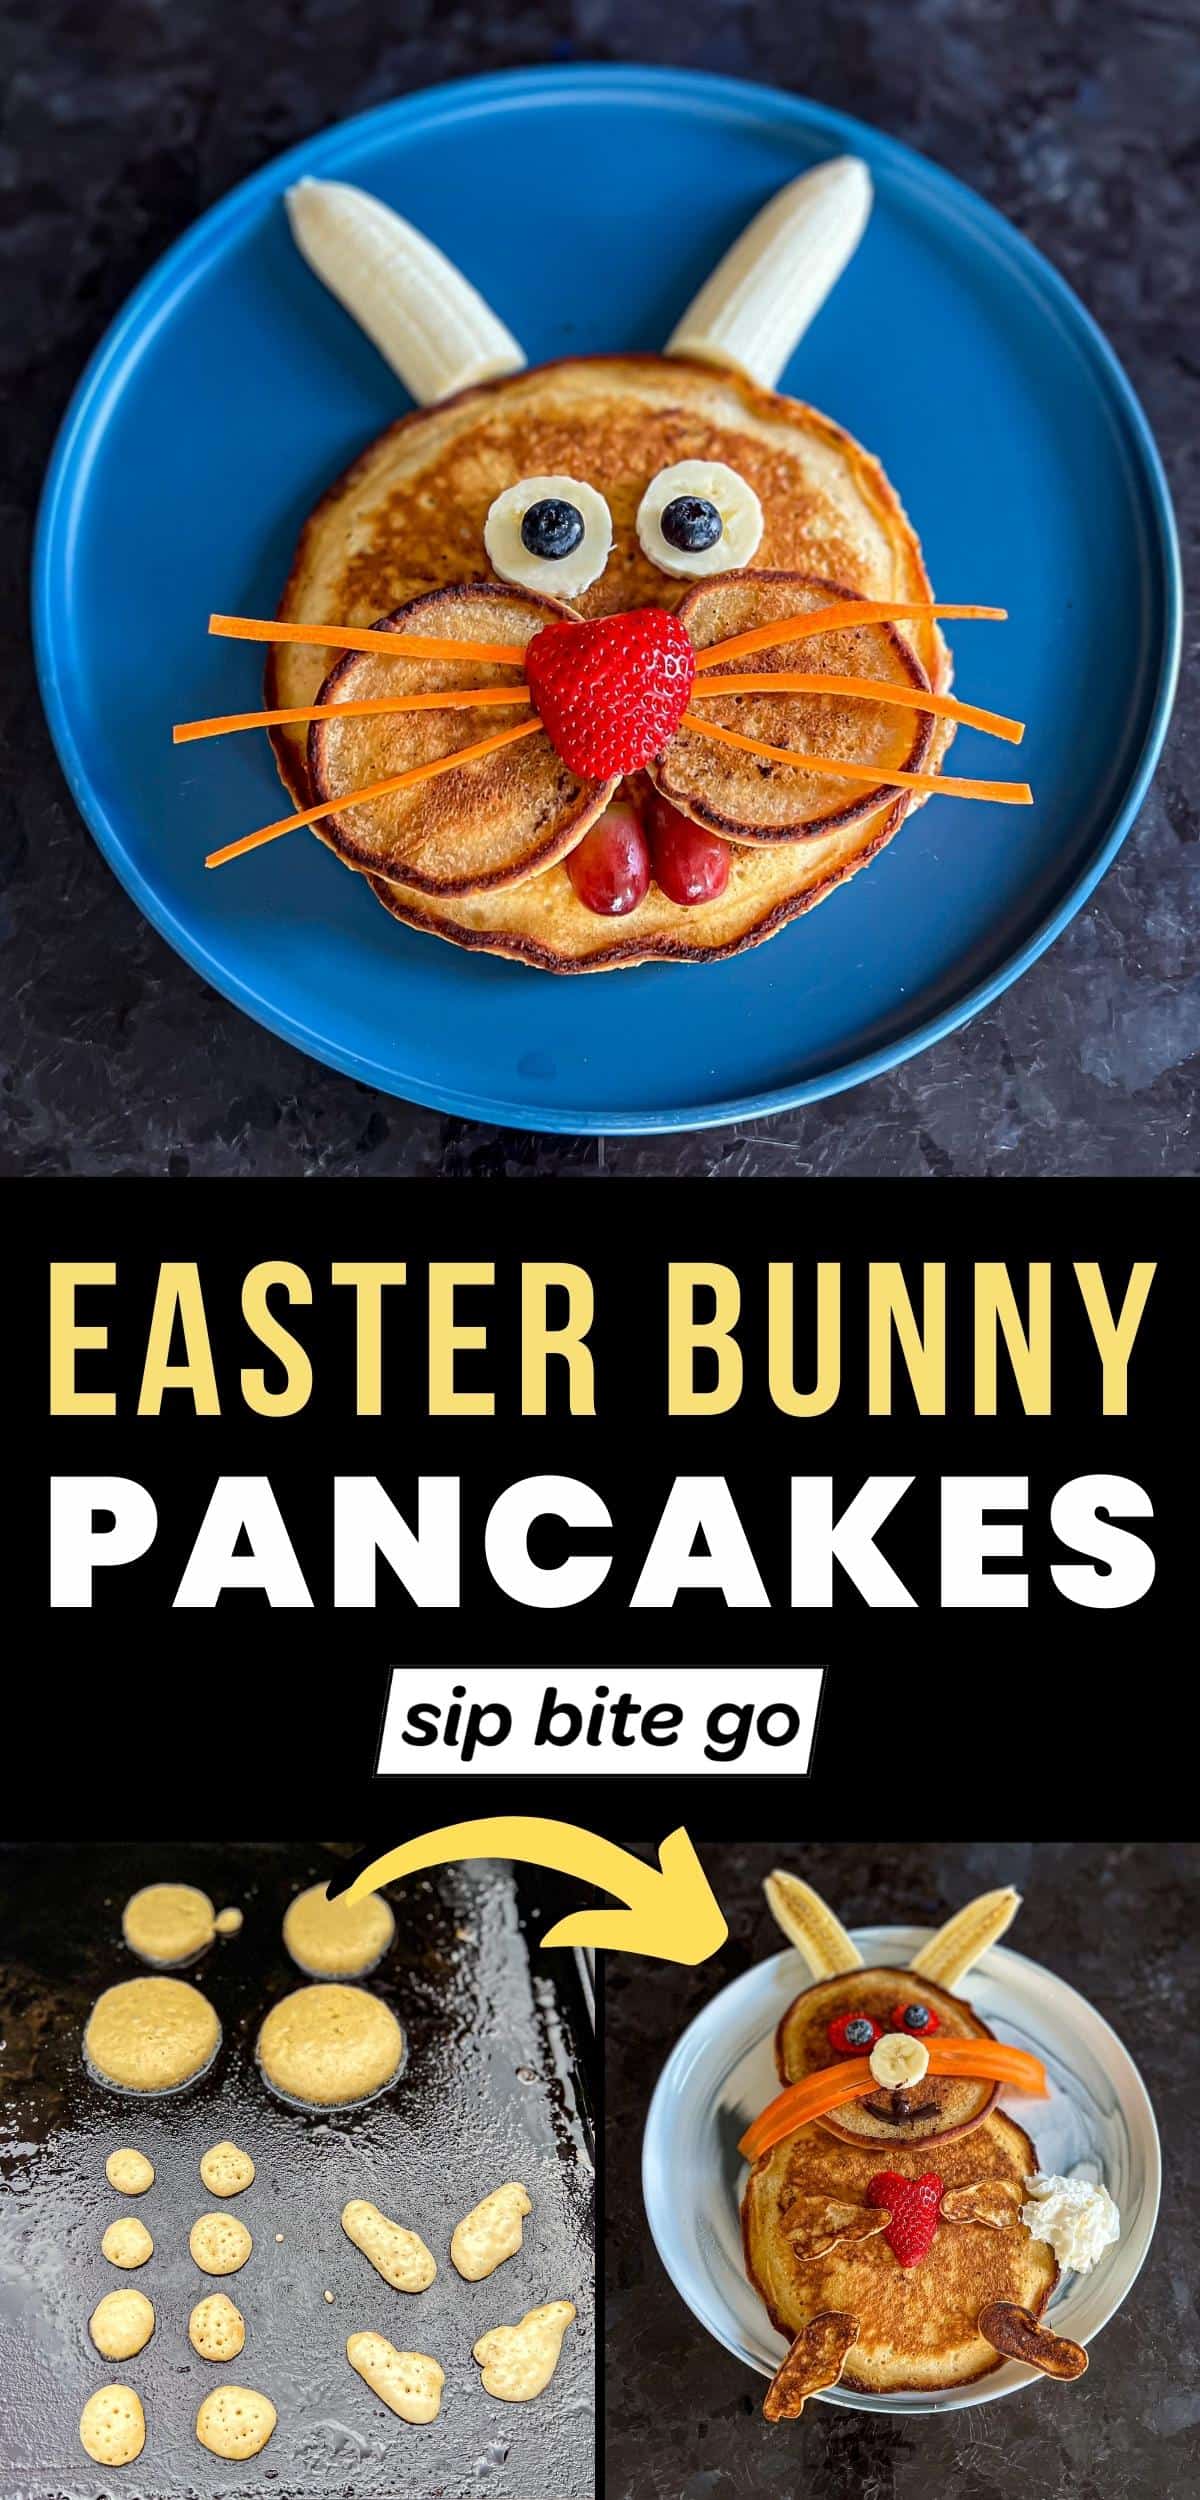 Easter Bunny Pancakes Ideas Recipes with text overlay and Sip Bite Go logo